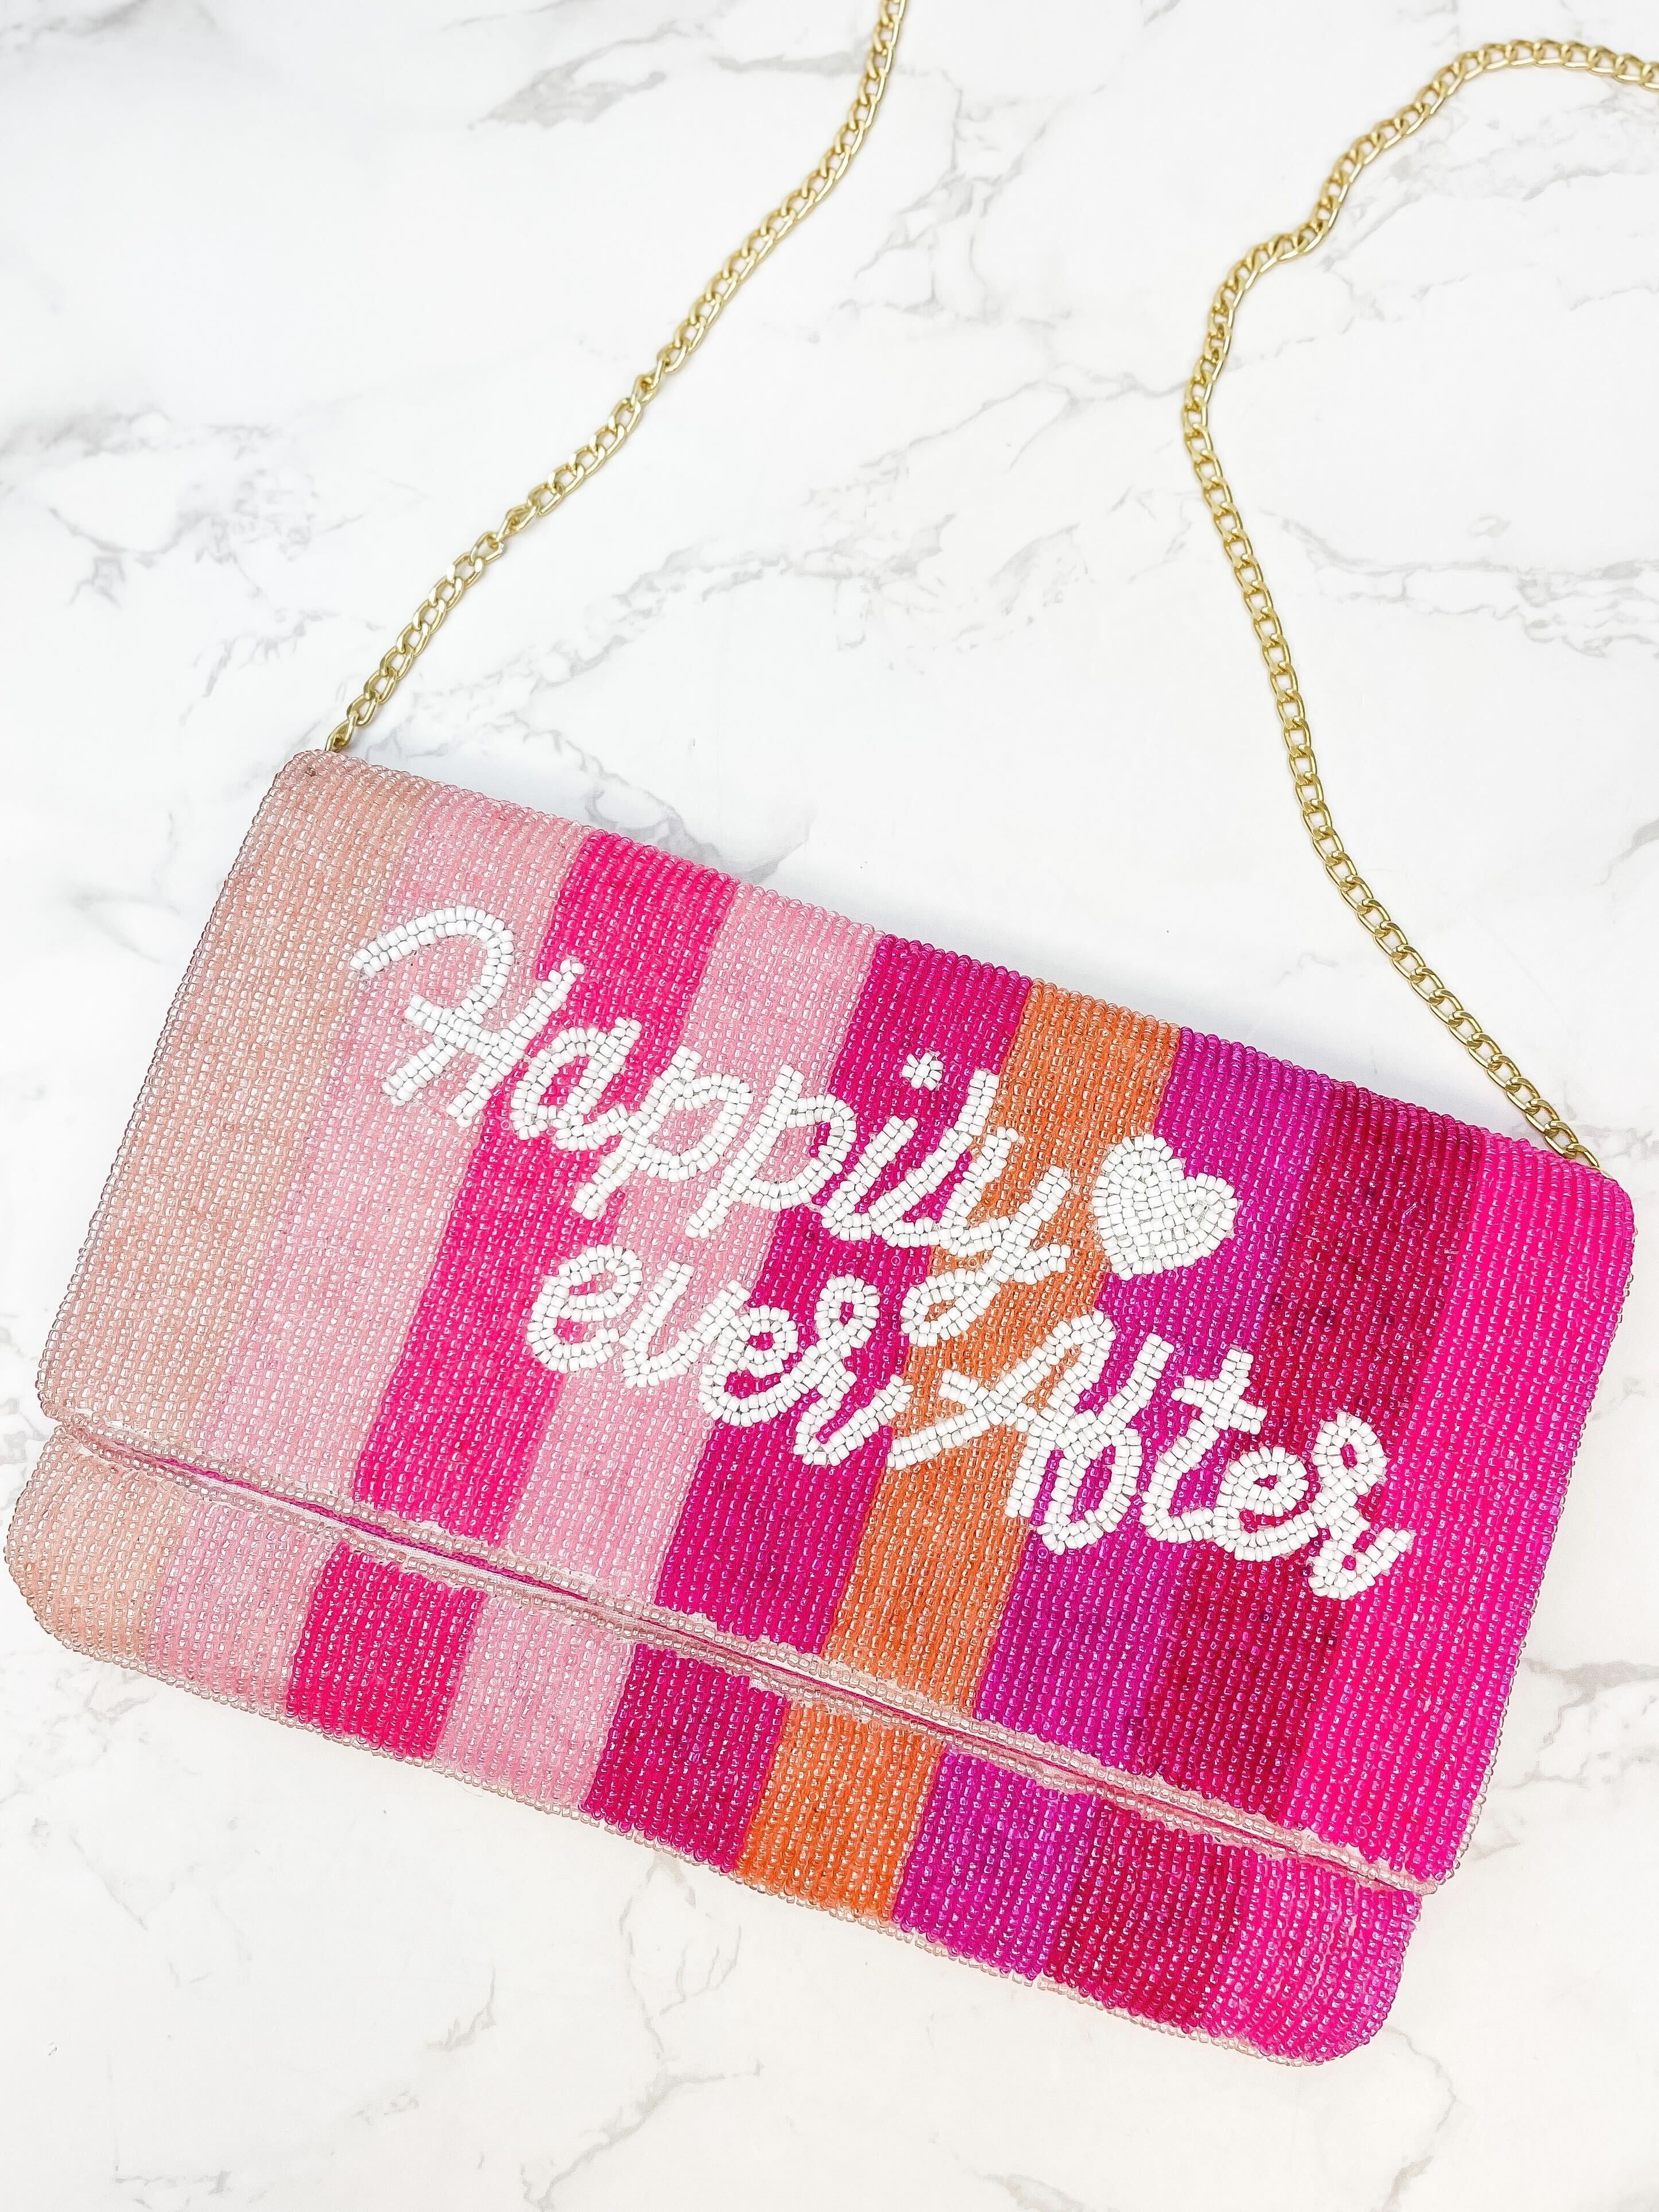 'Happily Ever After' Sequin Clutch